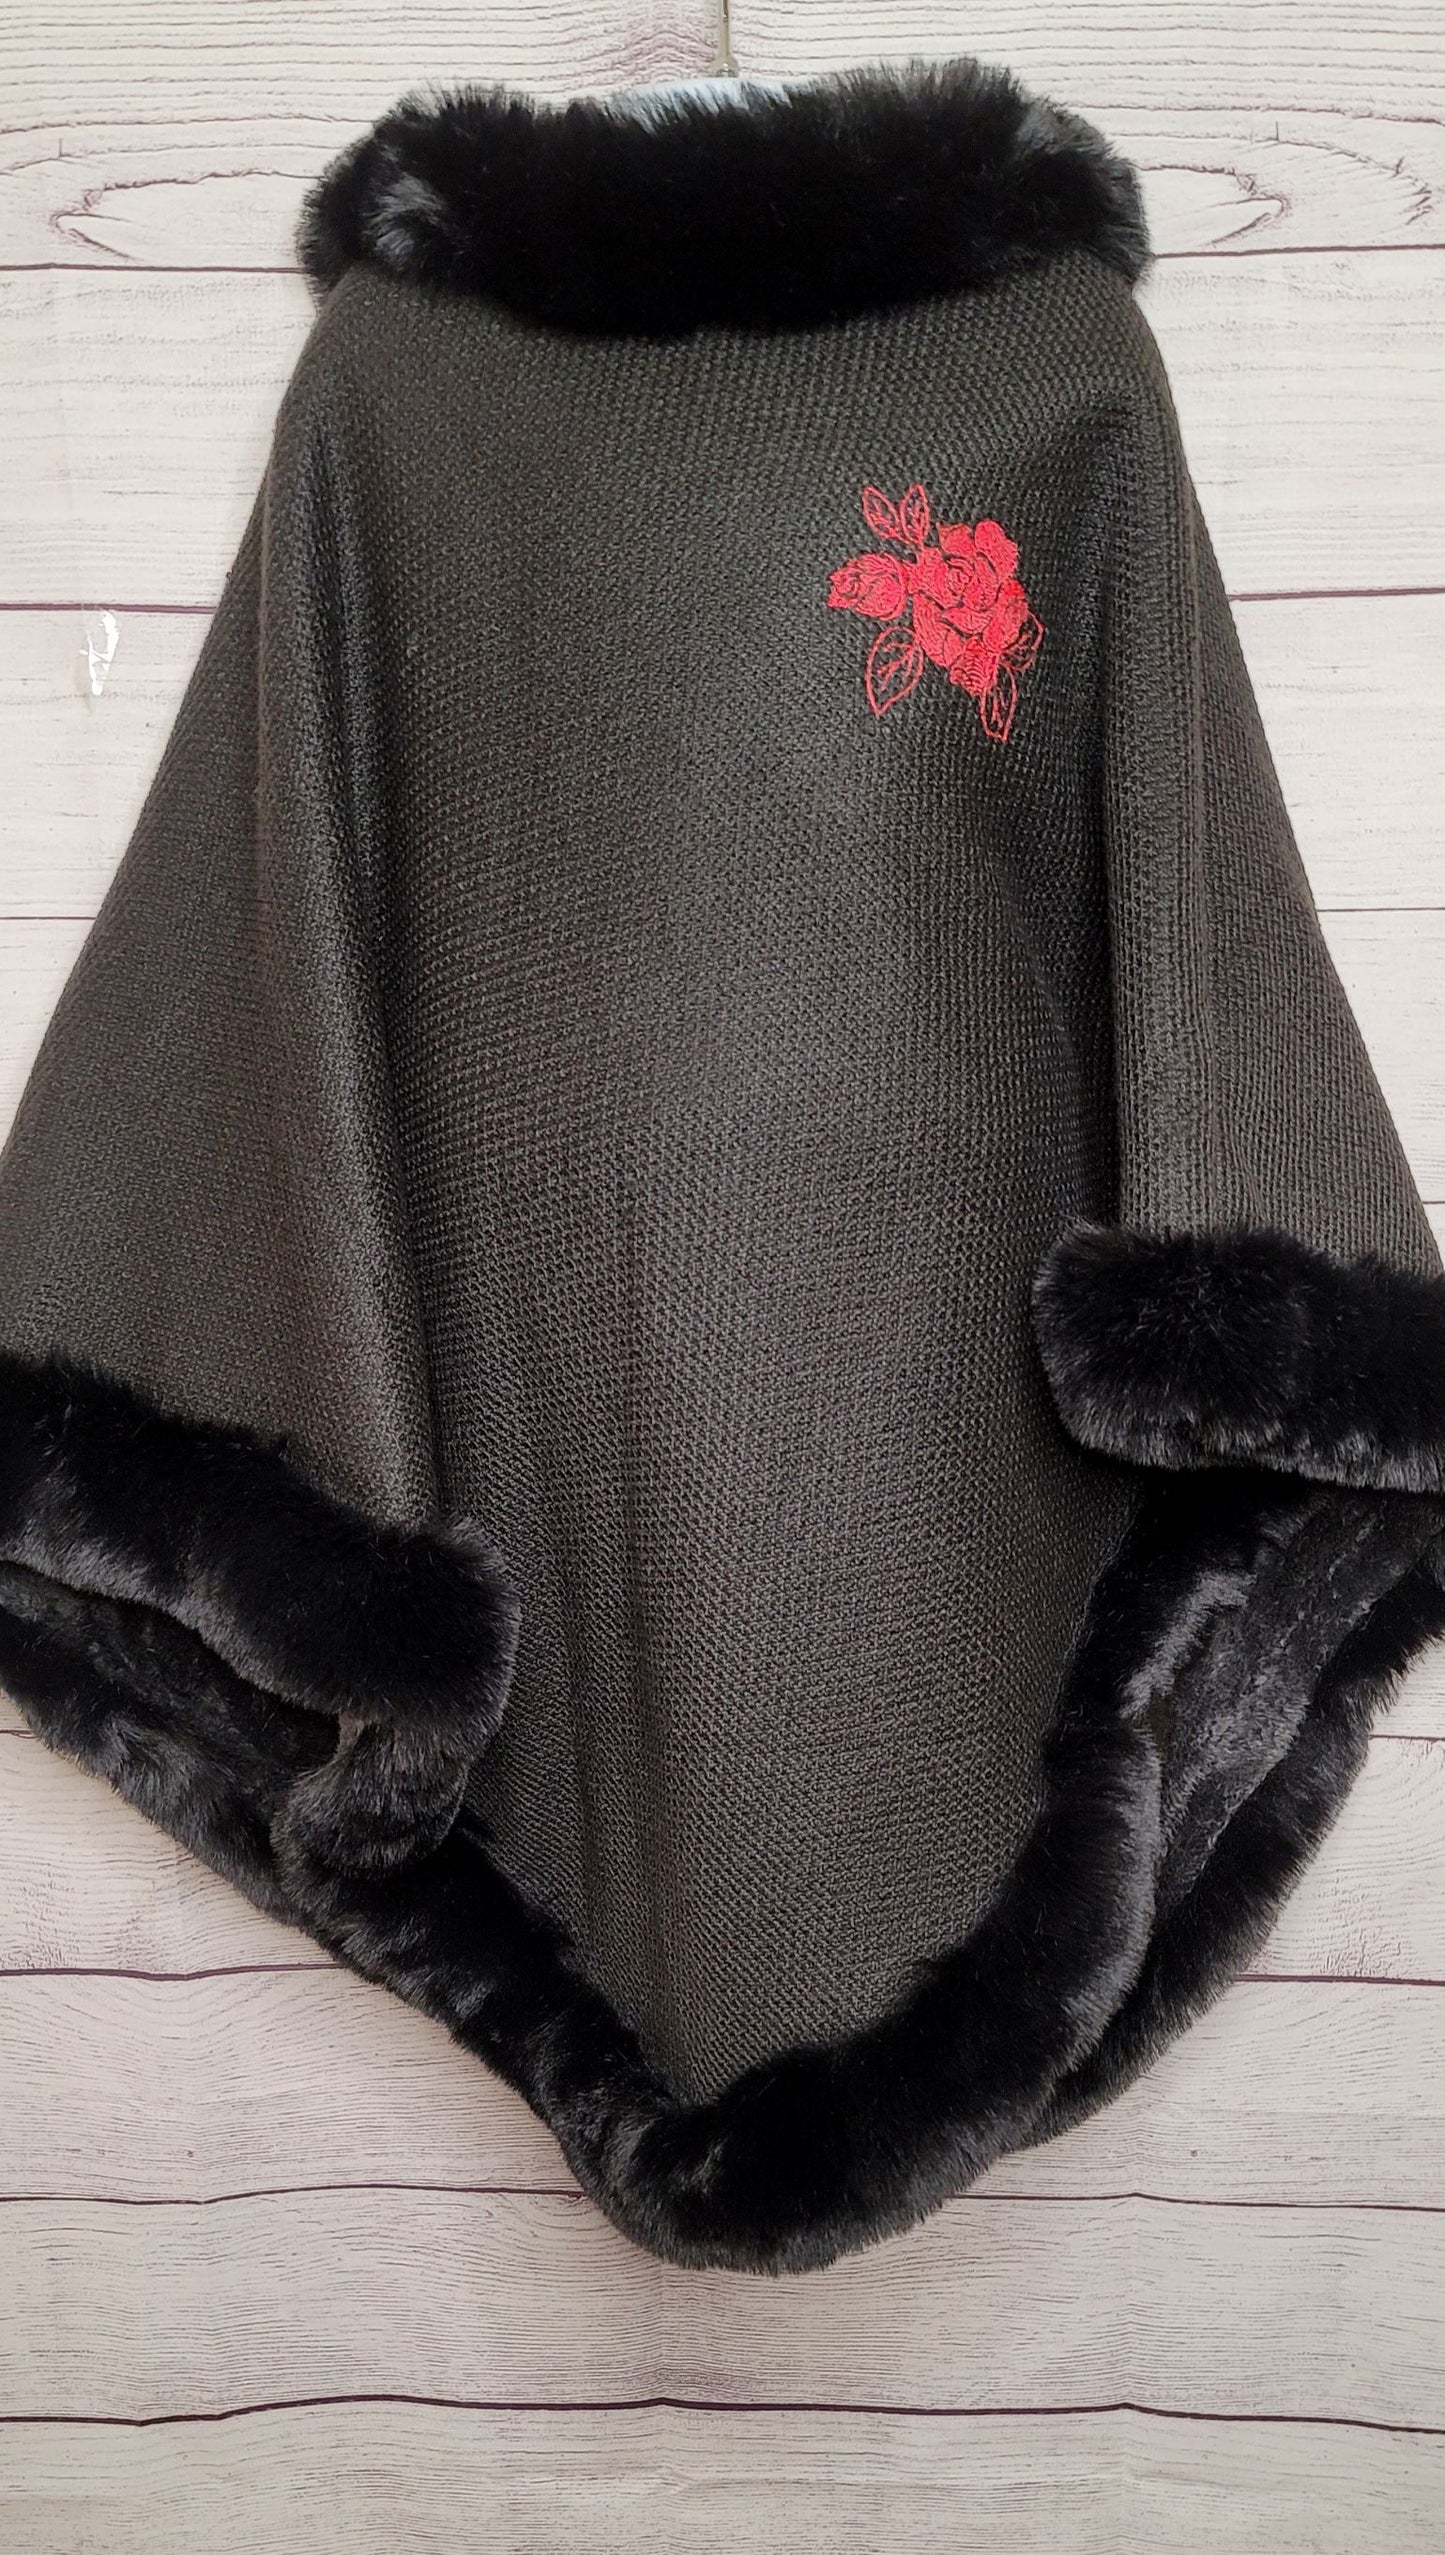 Rose Embroidery Fur Poncho| Women's Embroidery Ponchos